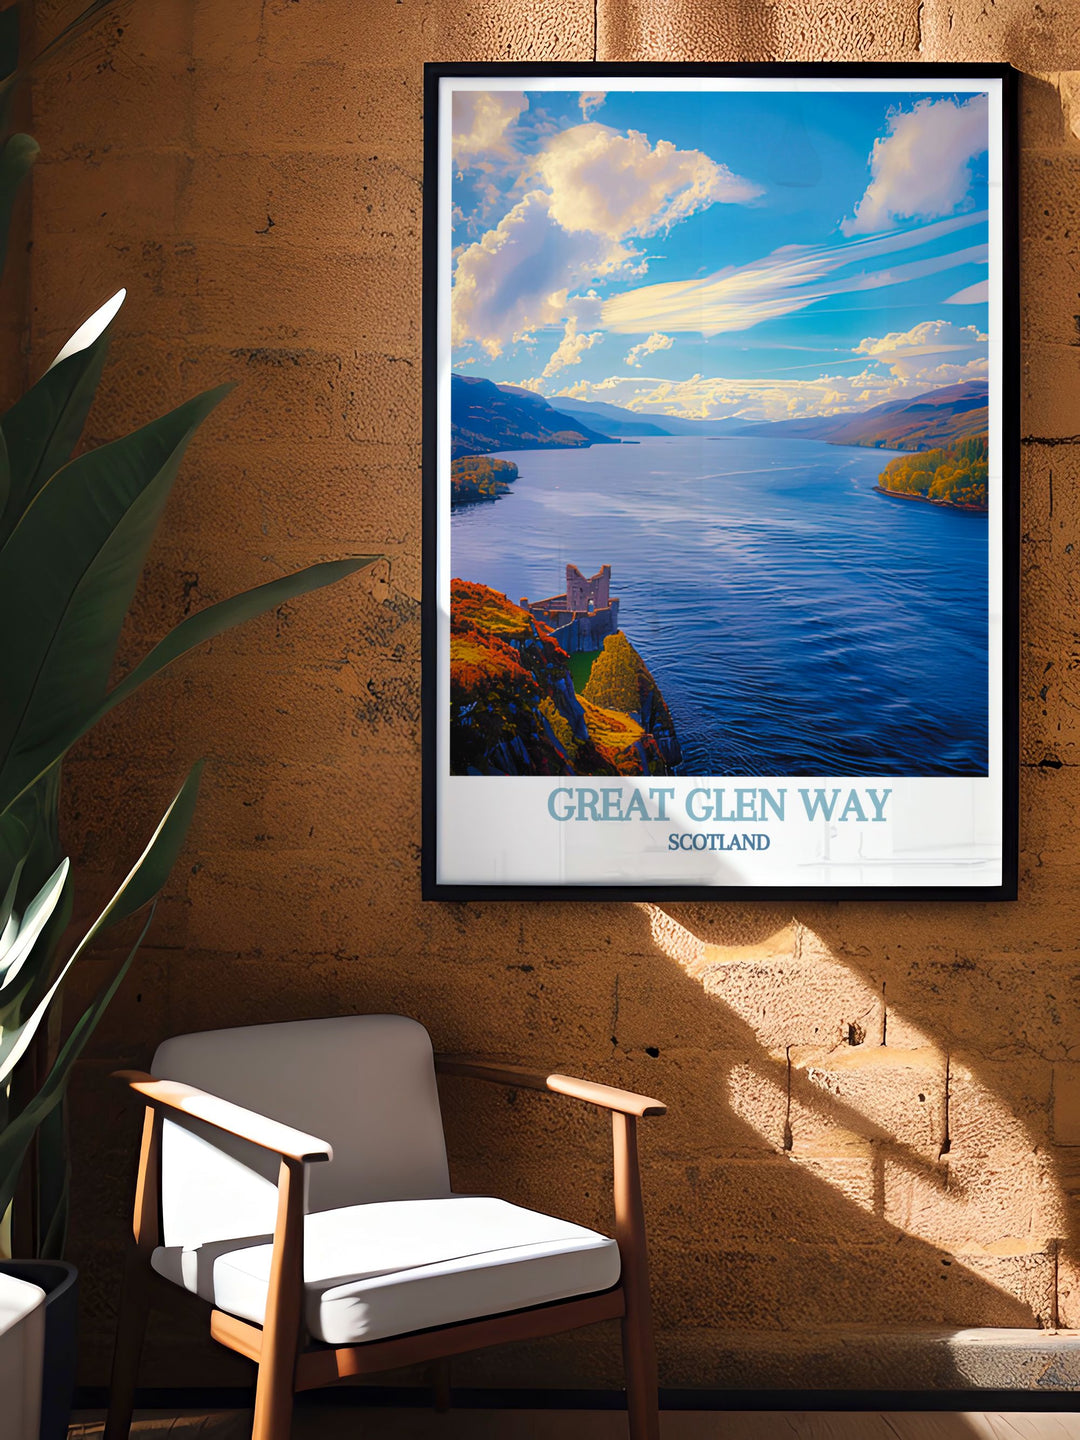 This vibrant depiction of the Great Glen Way highlights the scenic trail and its historical significance, inviting viewers to explore Scotlands rich heritage and breathtaking landscapes.